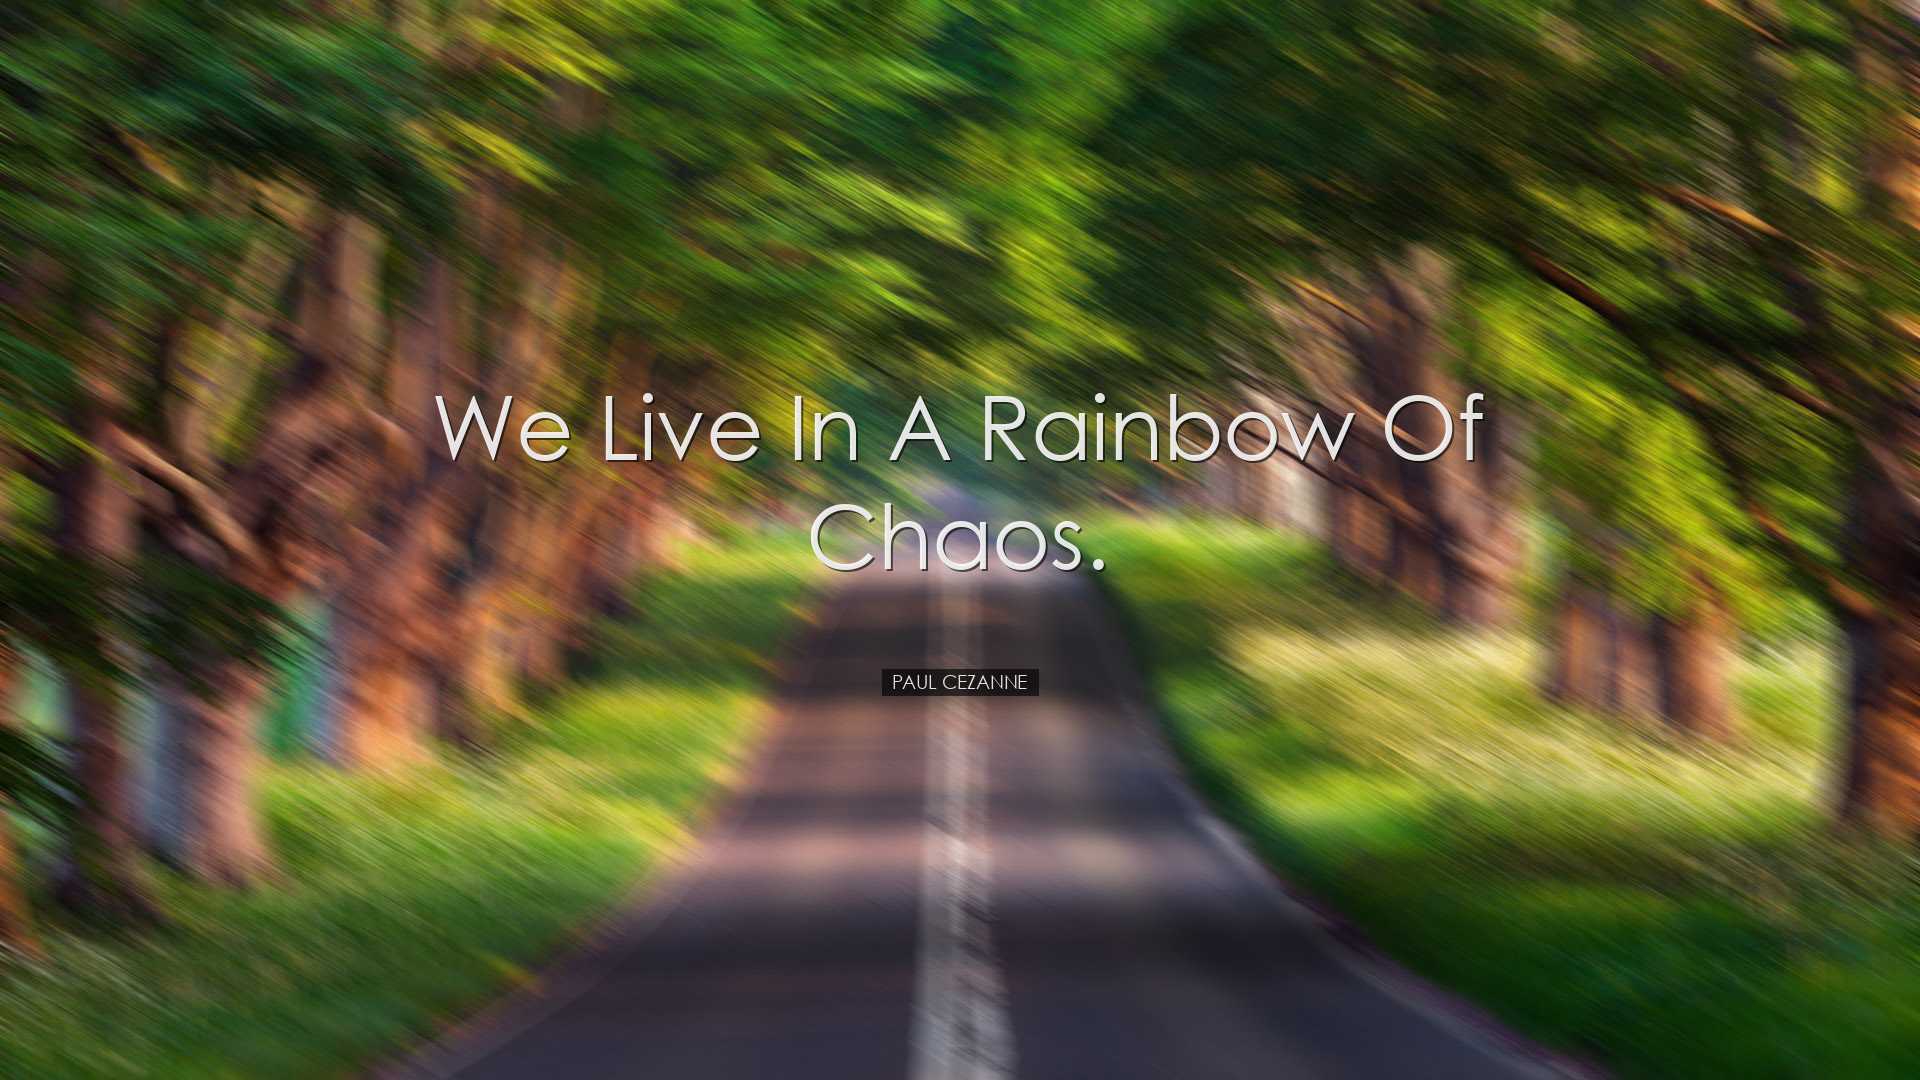 We live in a rainbow of chaos. - Paul Cezanne